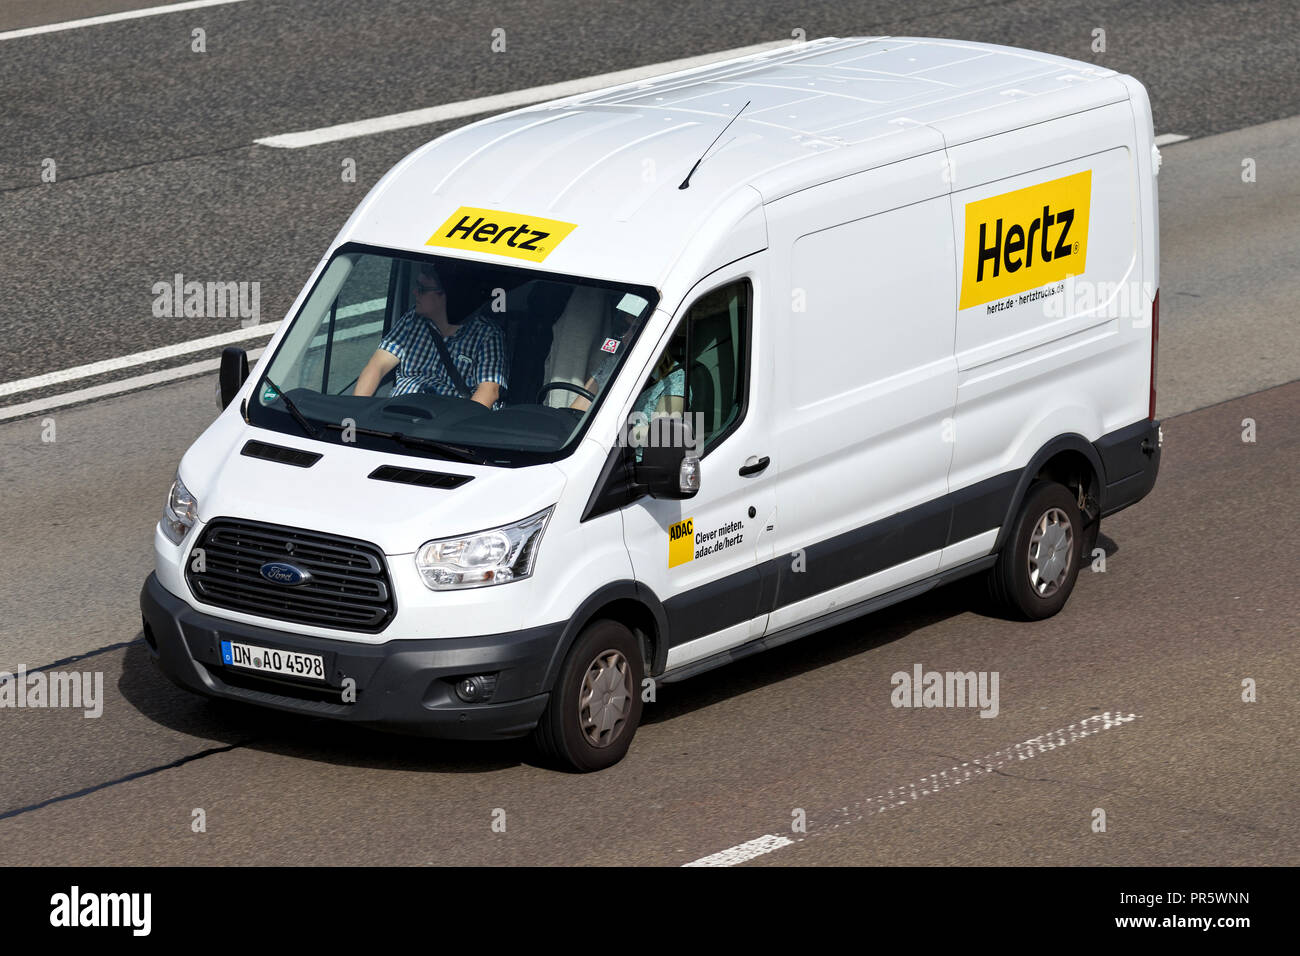 Ford Transit of Hertz on motorway. The Hertz Corporation is an American car rental company based in Estero, Florida. Stock Photo